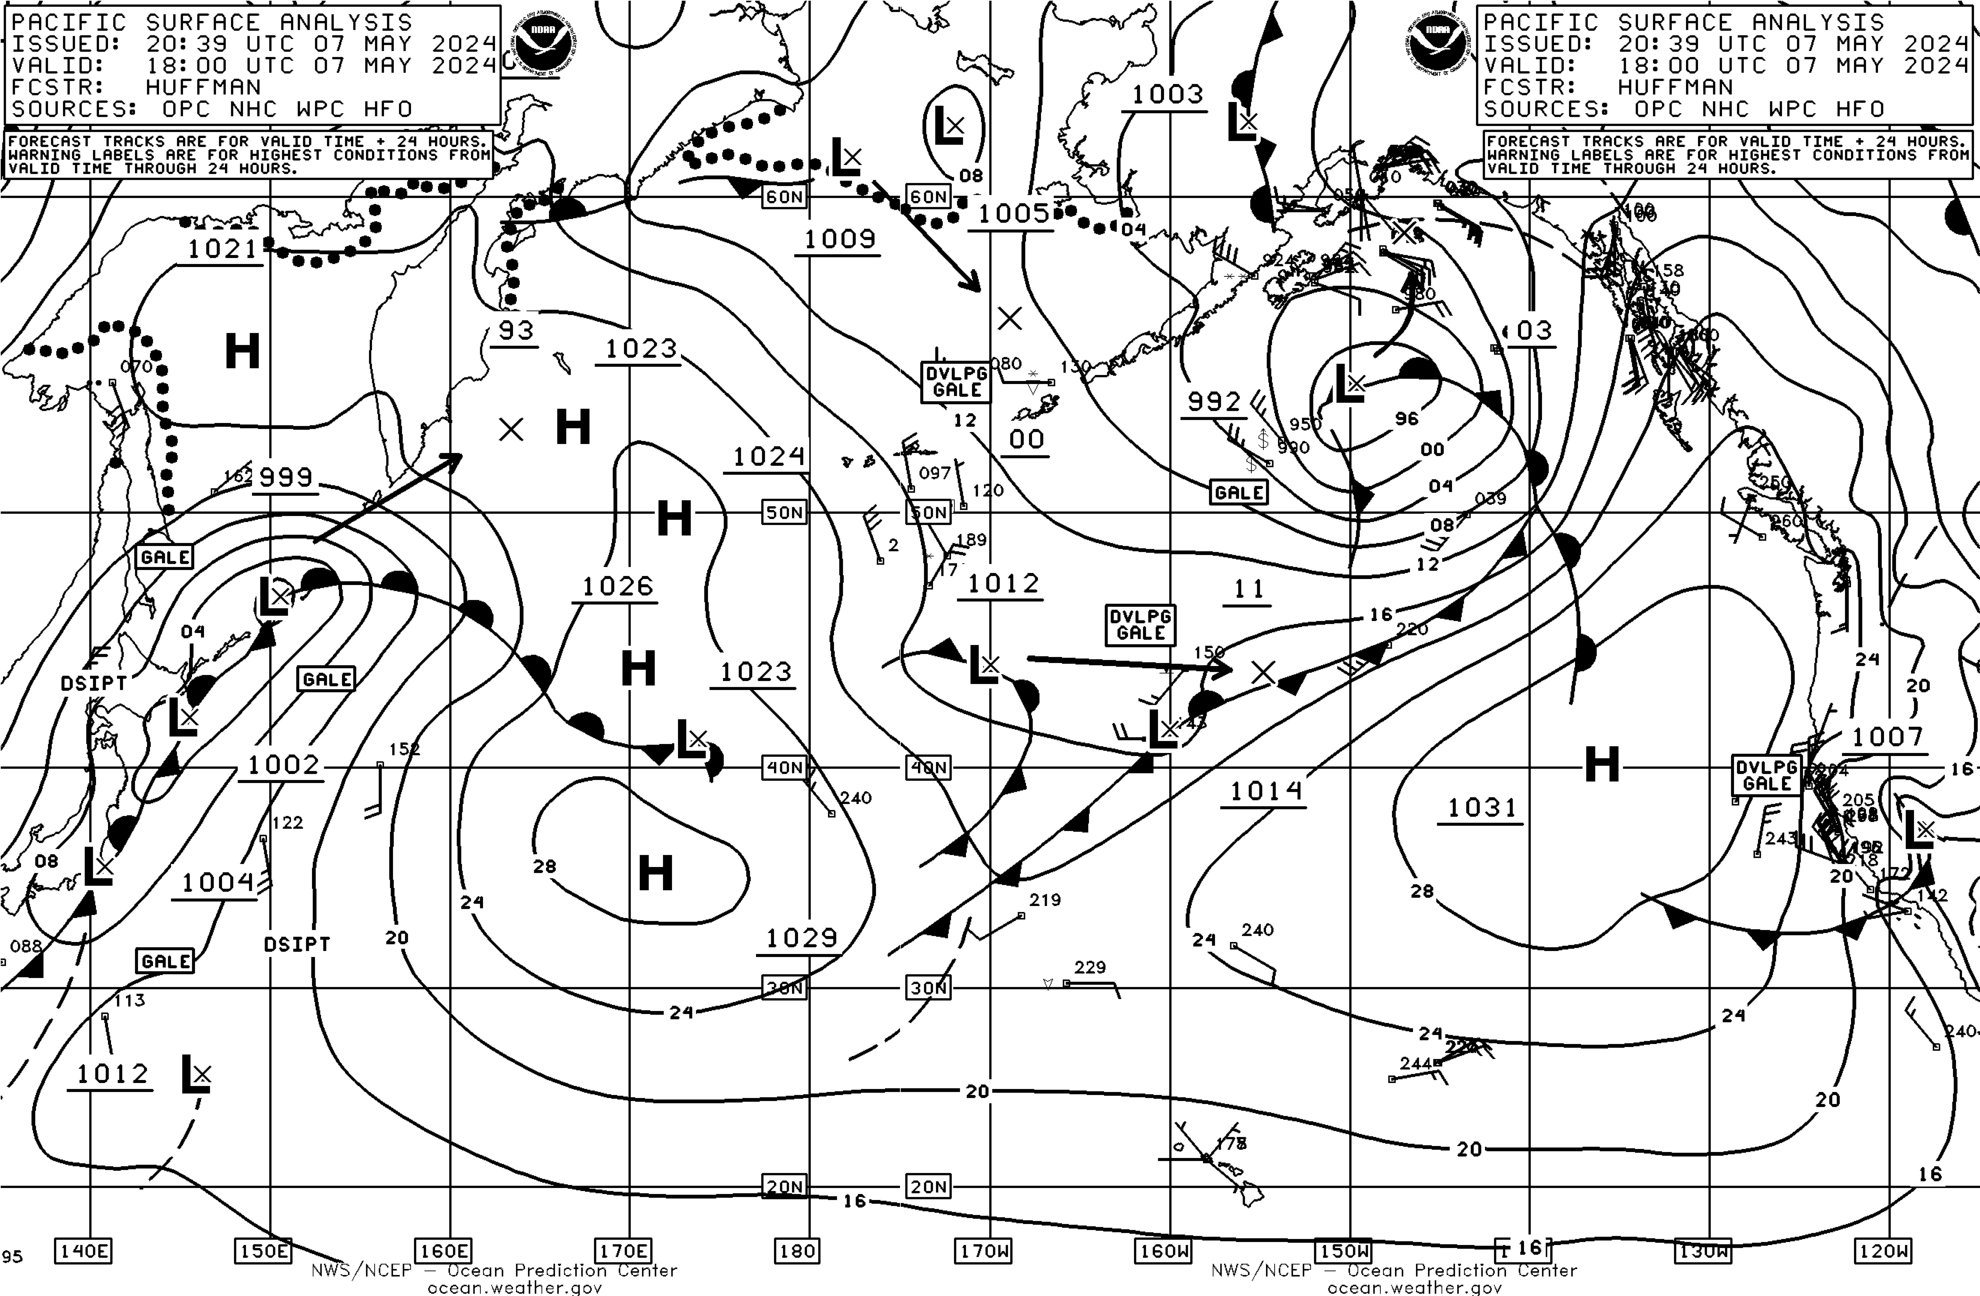 Pacific surface analysis